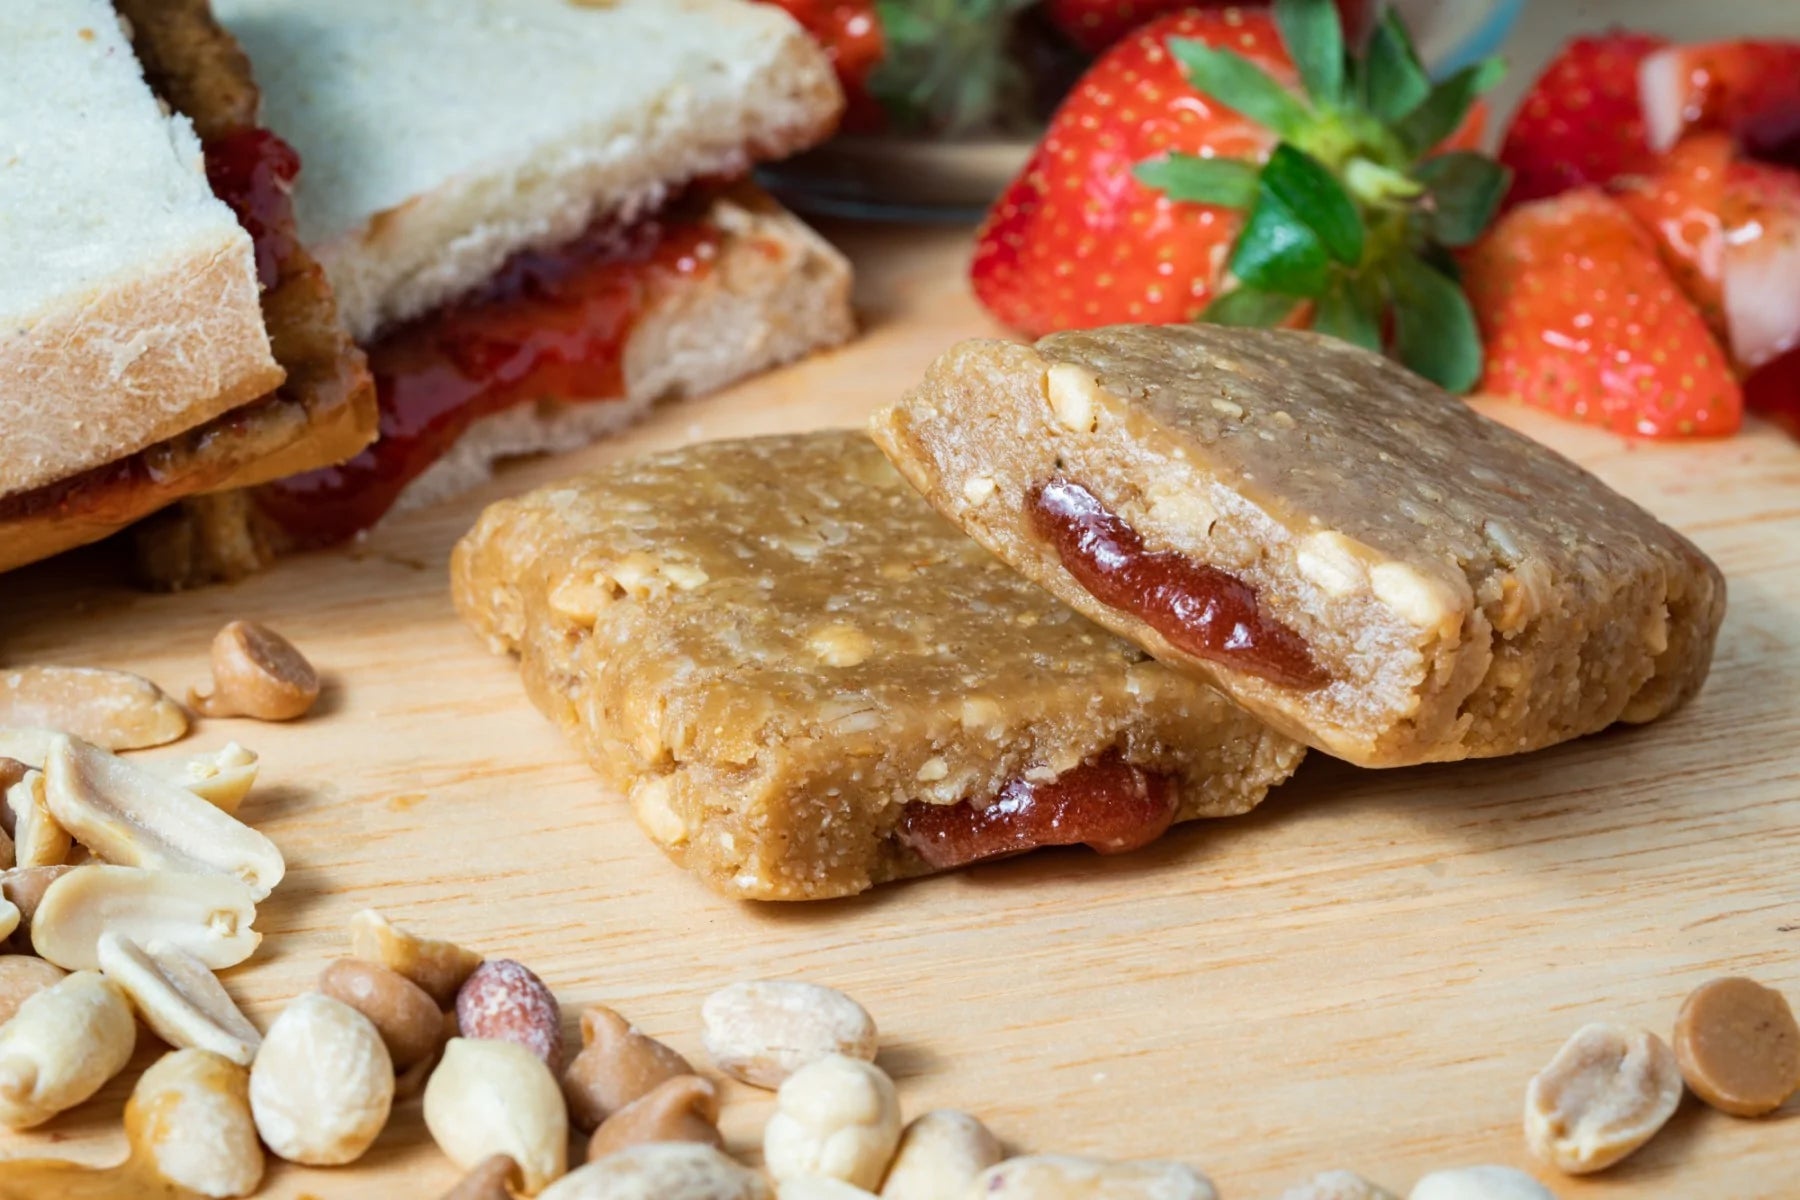 Bonk Breaker Peanut Butter and Jelly Real Food Energy Bar close up